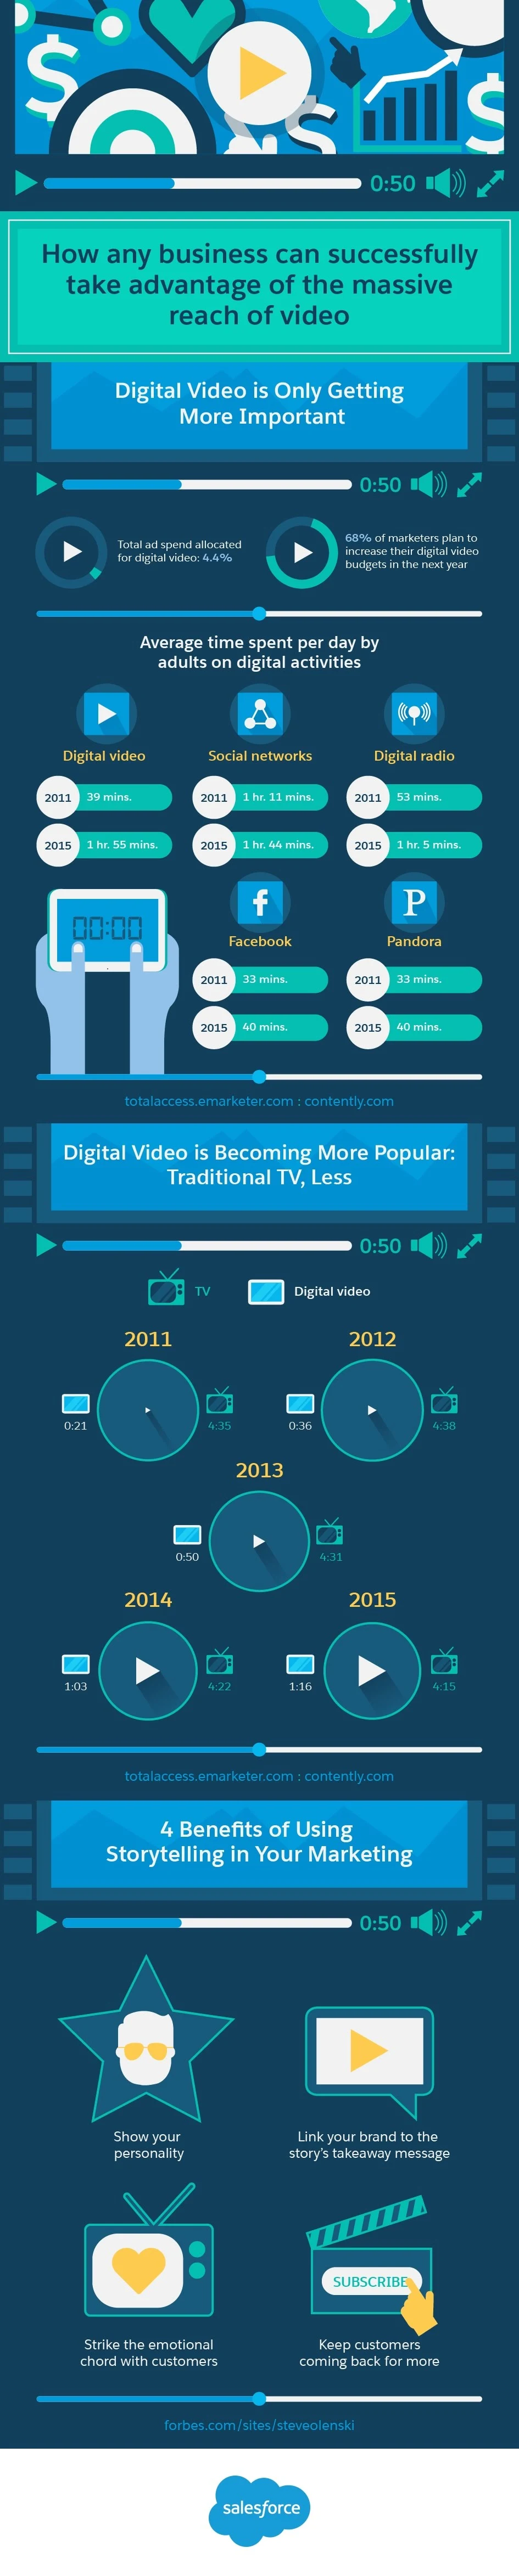 How Businesses Can Take Advantage of the Power of Video Marketing - #infographic